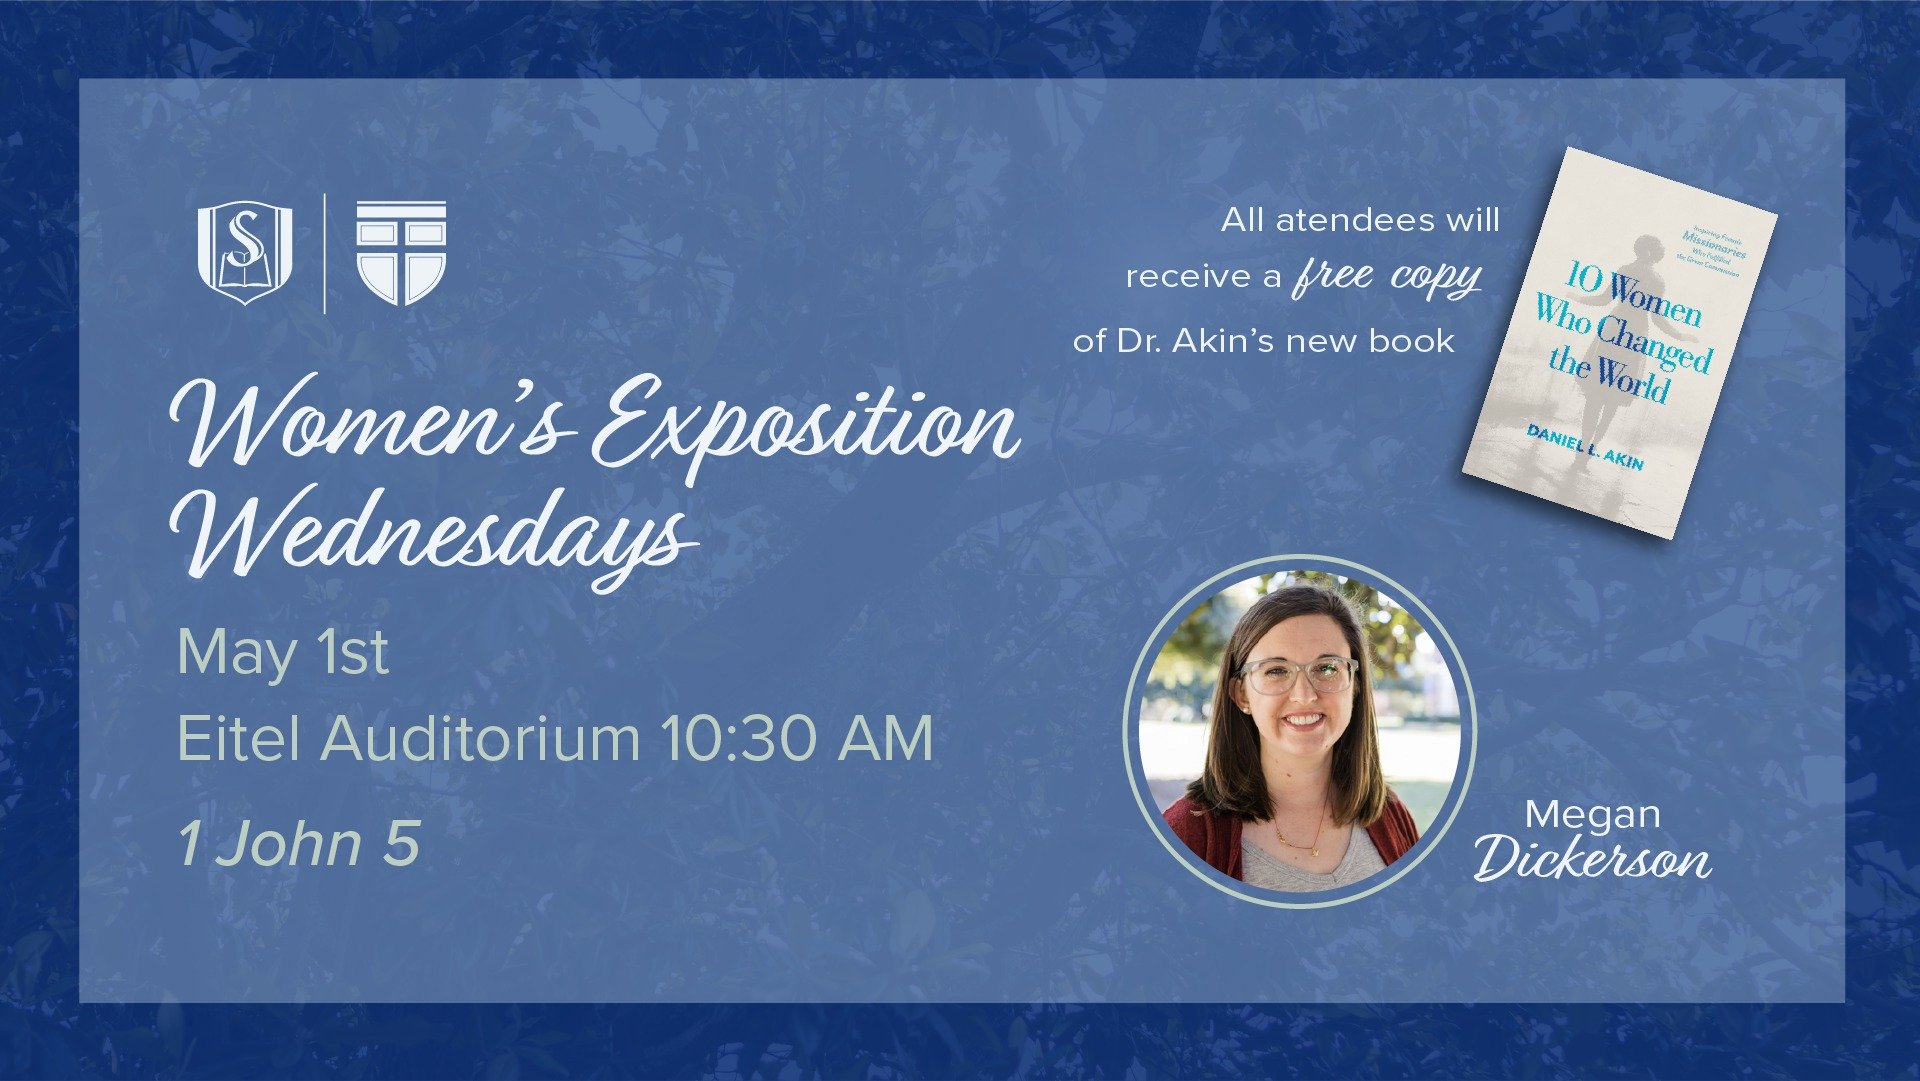 Join us THIS Wednesday for our final Women's Exposition Wednesday of the semester! Megan Dickerson will be teaching from 1 John 5. All who attend will get a free copy of Dr. Akin's new book &quot;10 Women Who Changed the World&quot;.